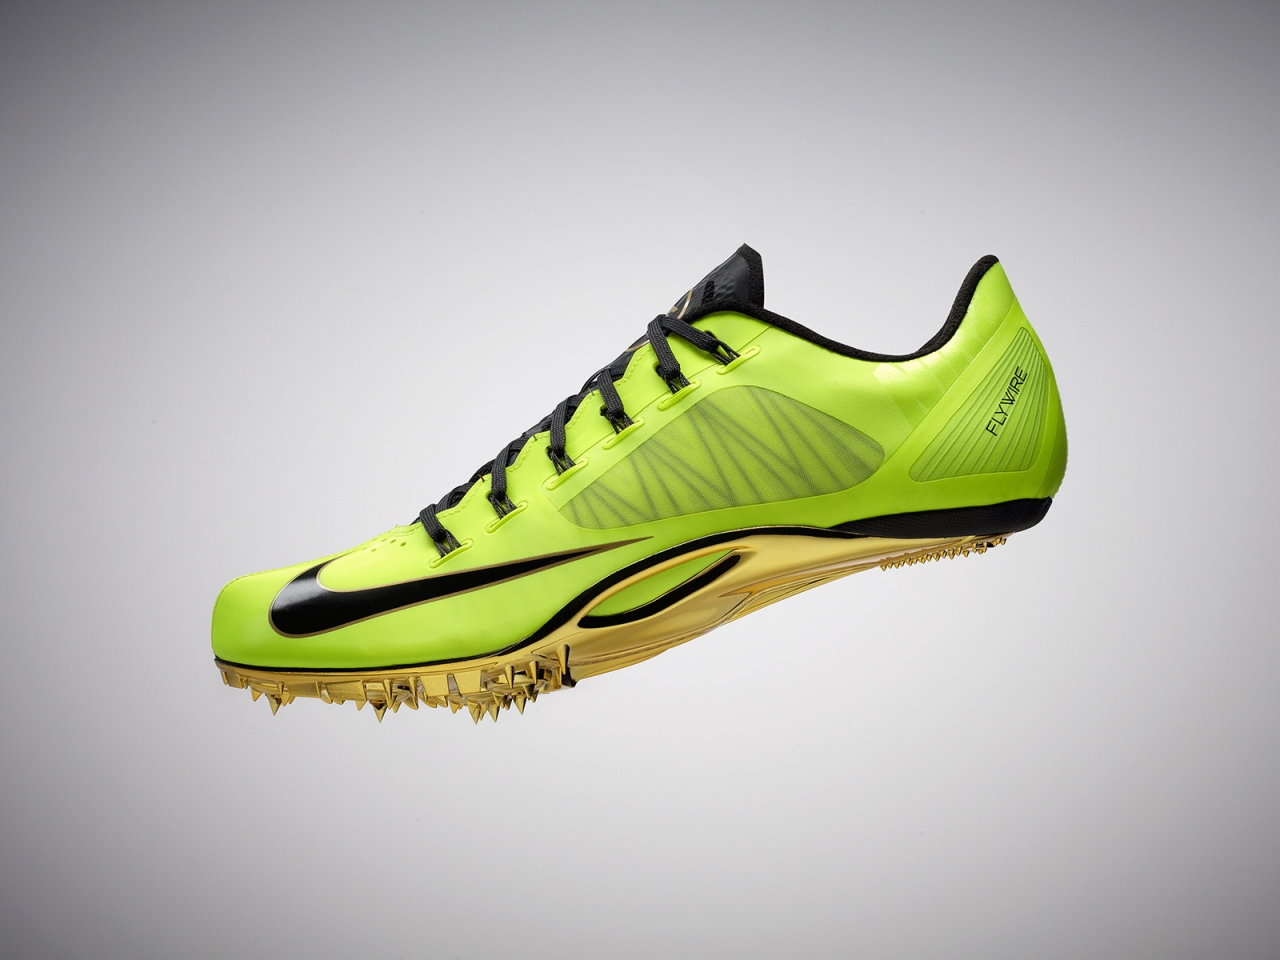 Nike Zoom Superfly R4 for 1280 x 960 resolution